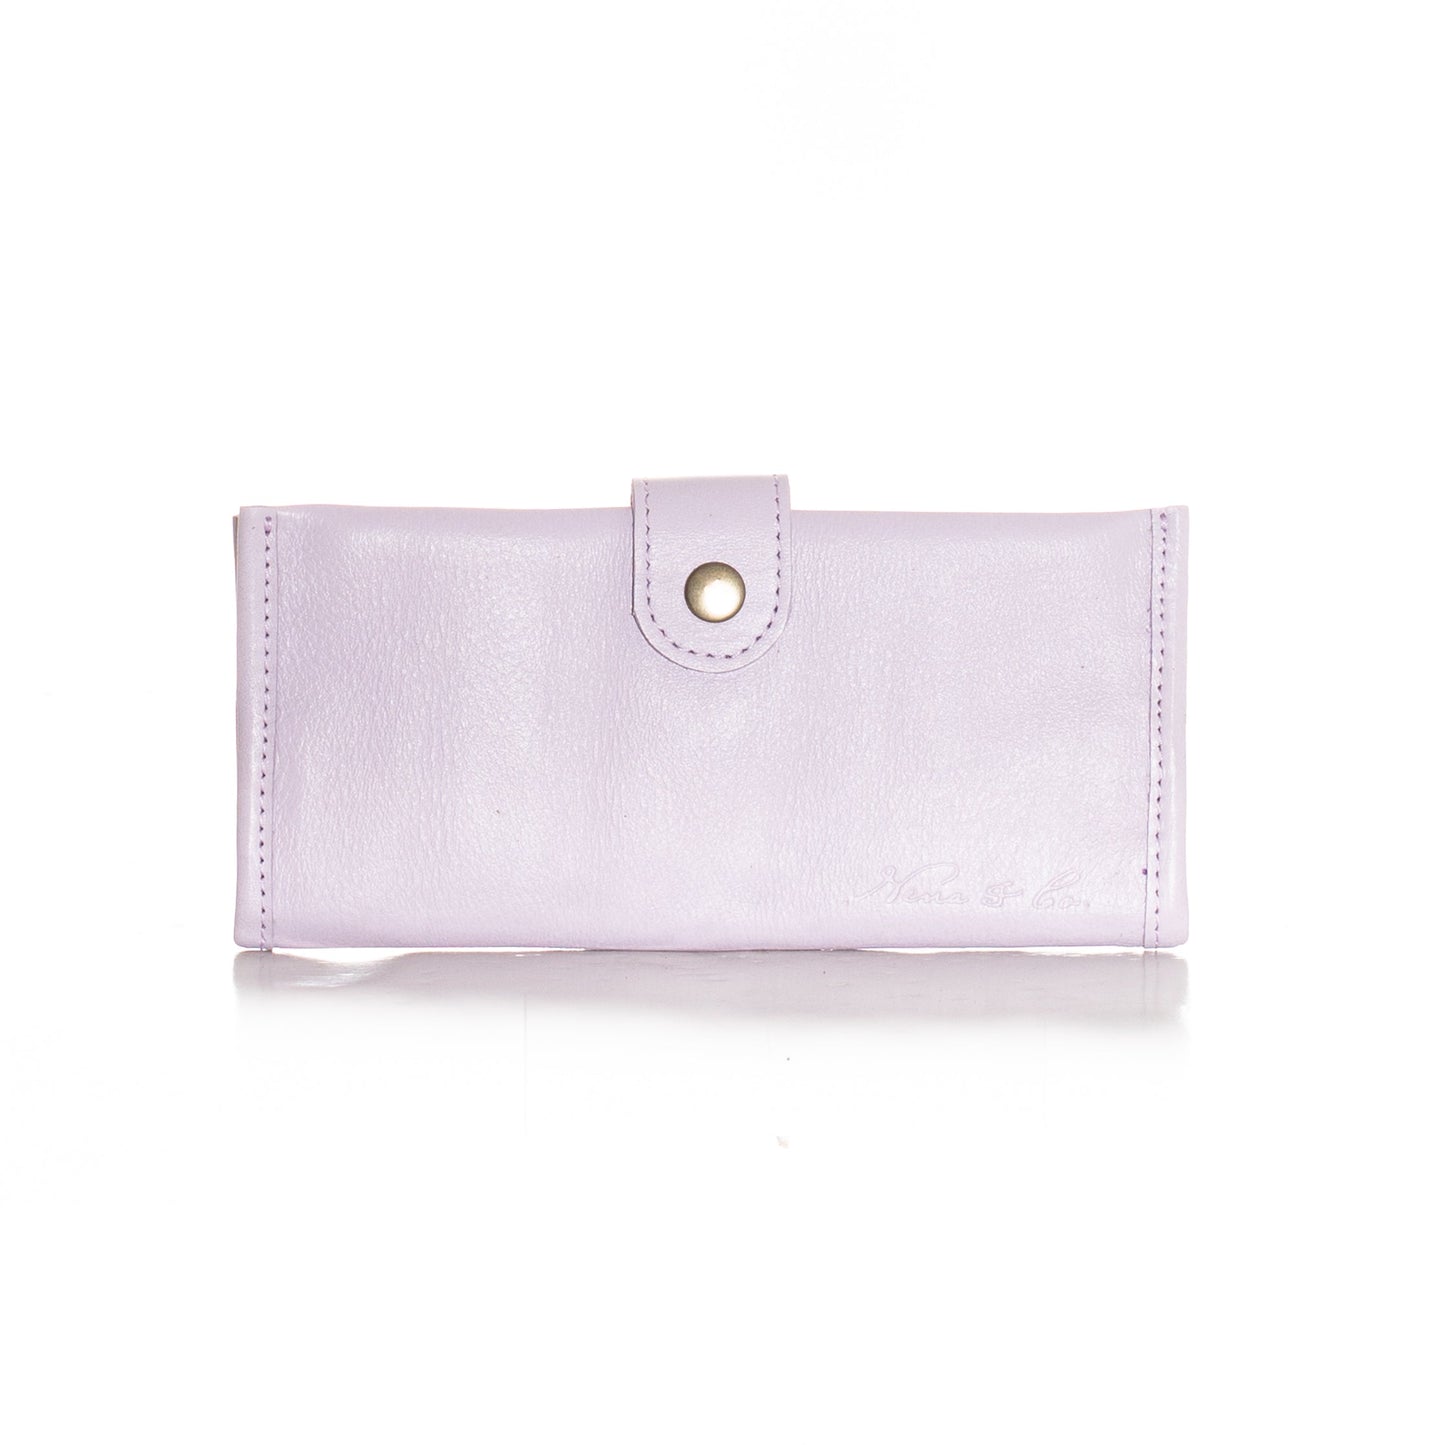 ARTISAN WALLET WITH SNAP - LAVENDER